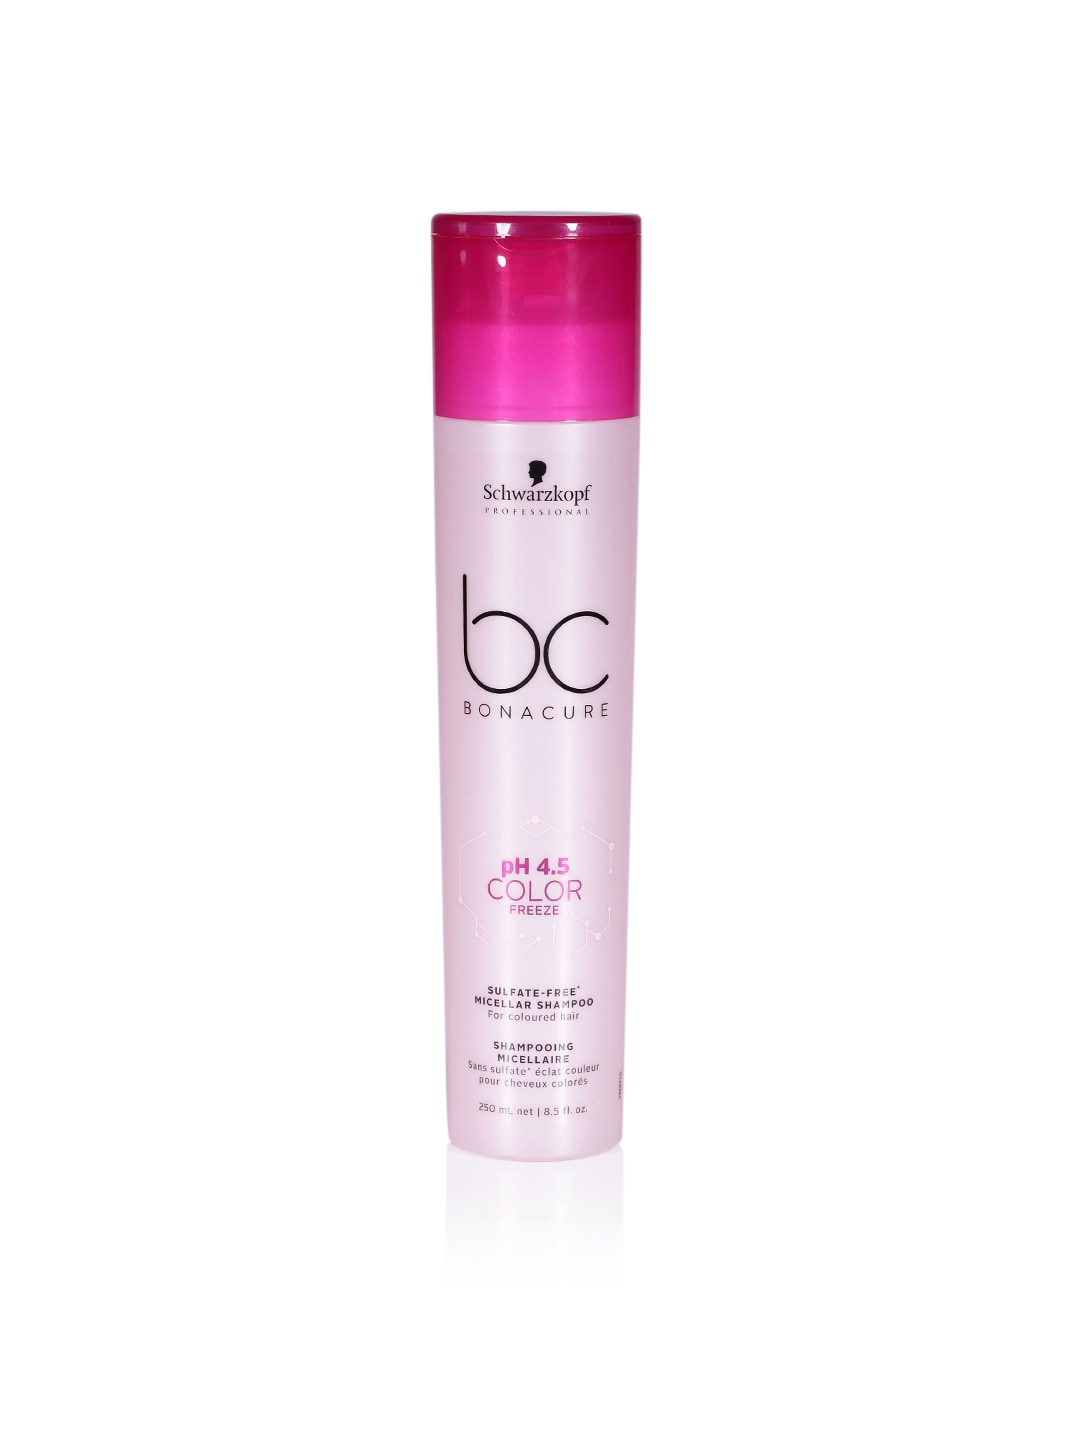 Schwarzkopf Prpfessional Bonacure pH 4.5 Color Freeze Sulfate Free Micellar Shampoo 250 ml Price in India